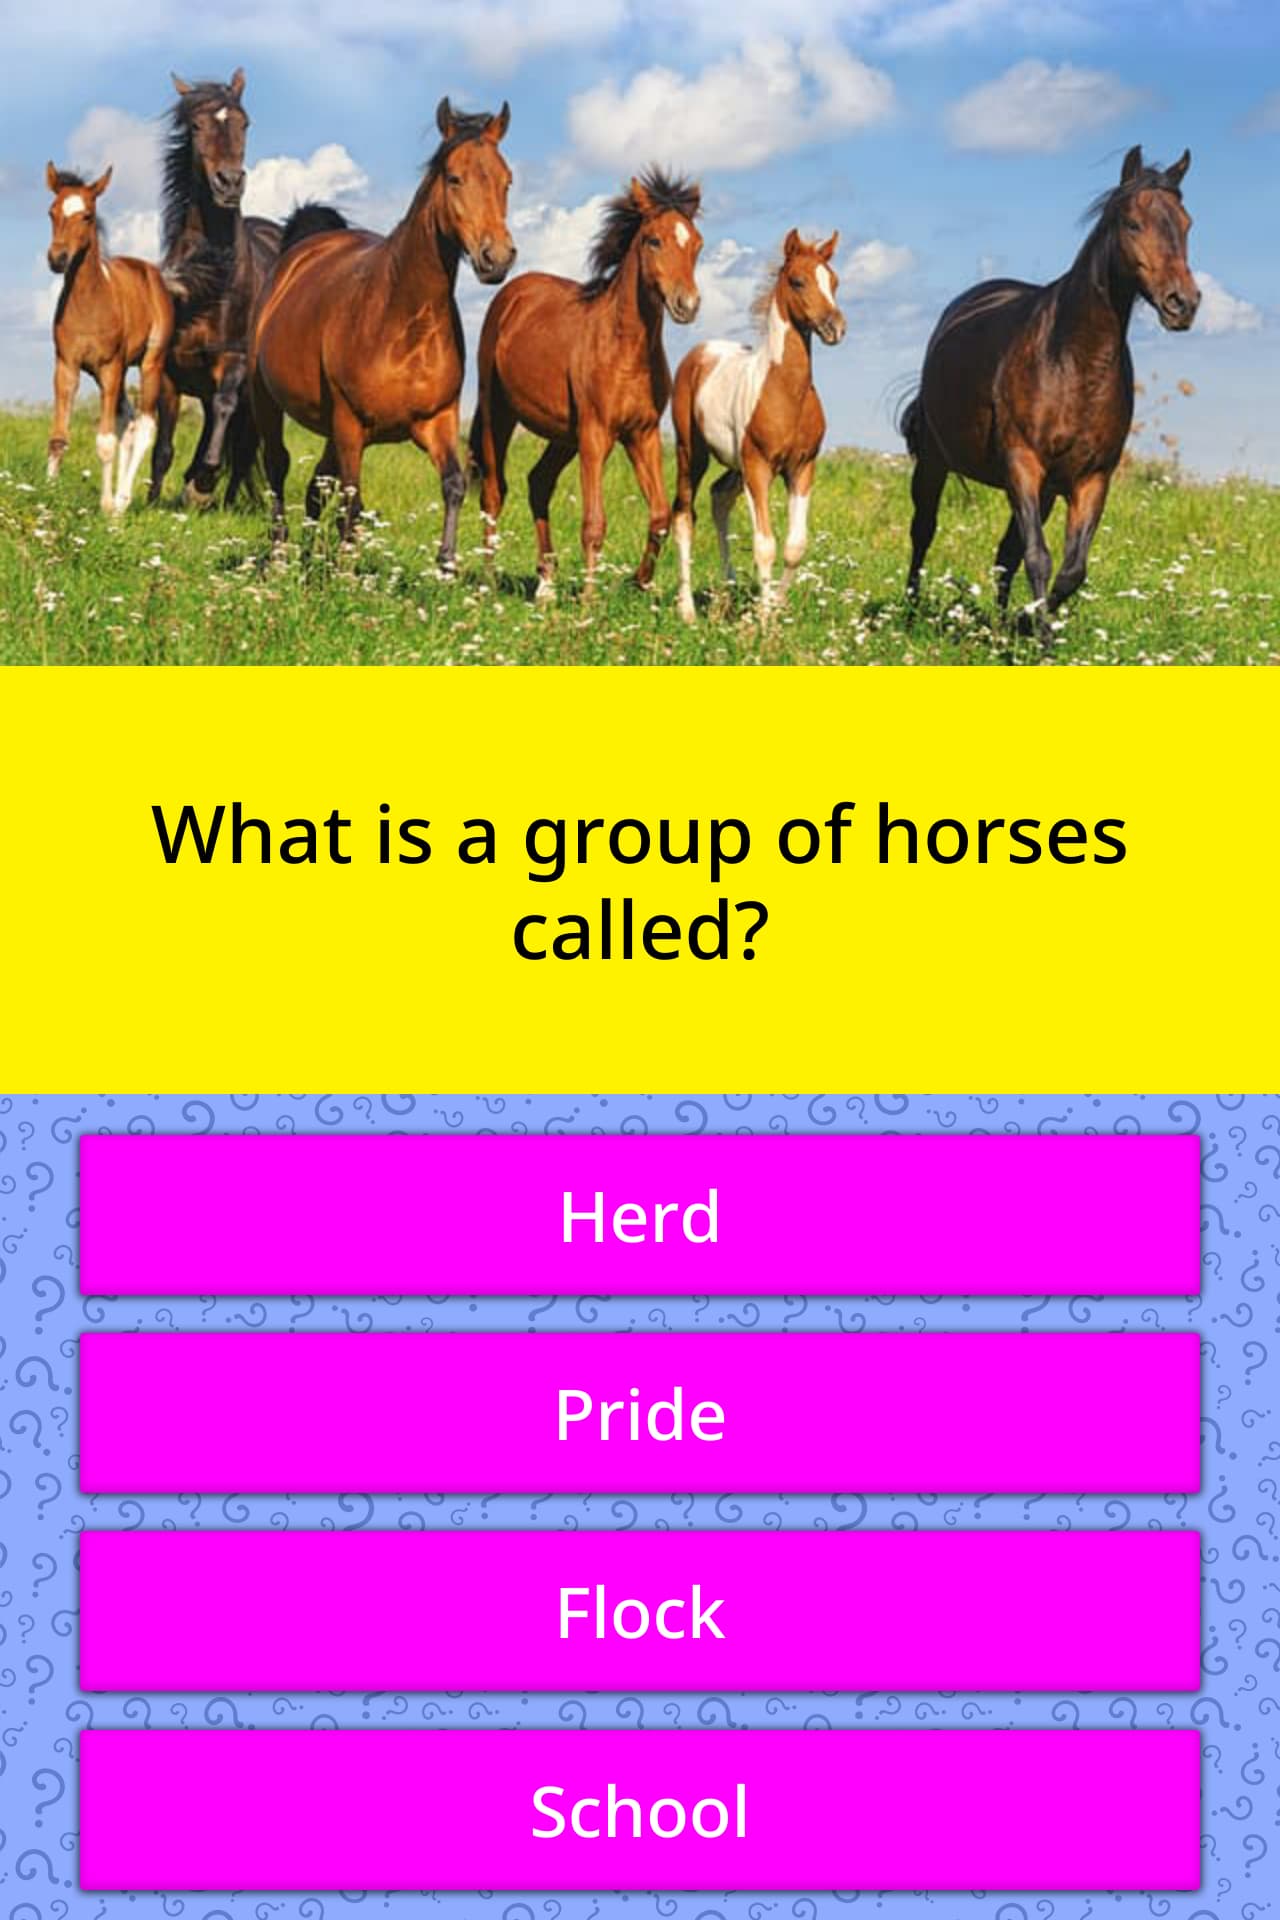 Is a group of horses called a herd?